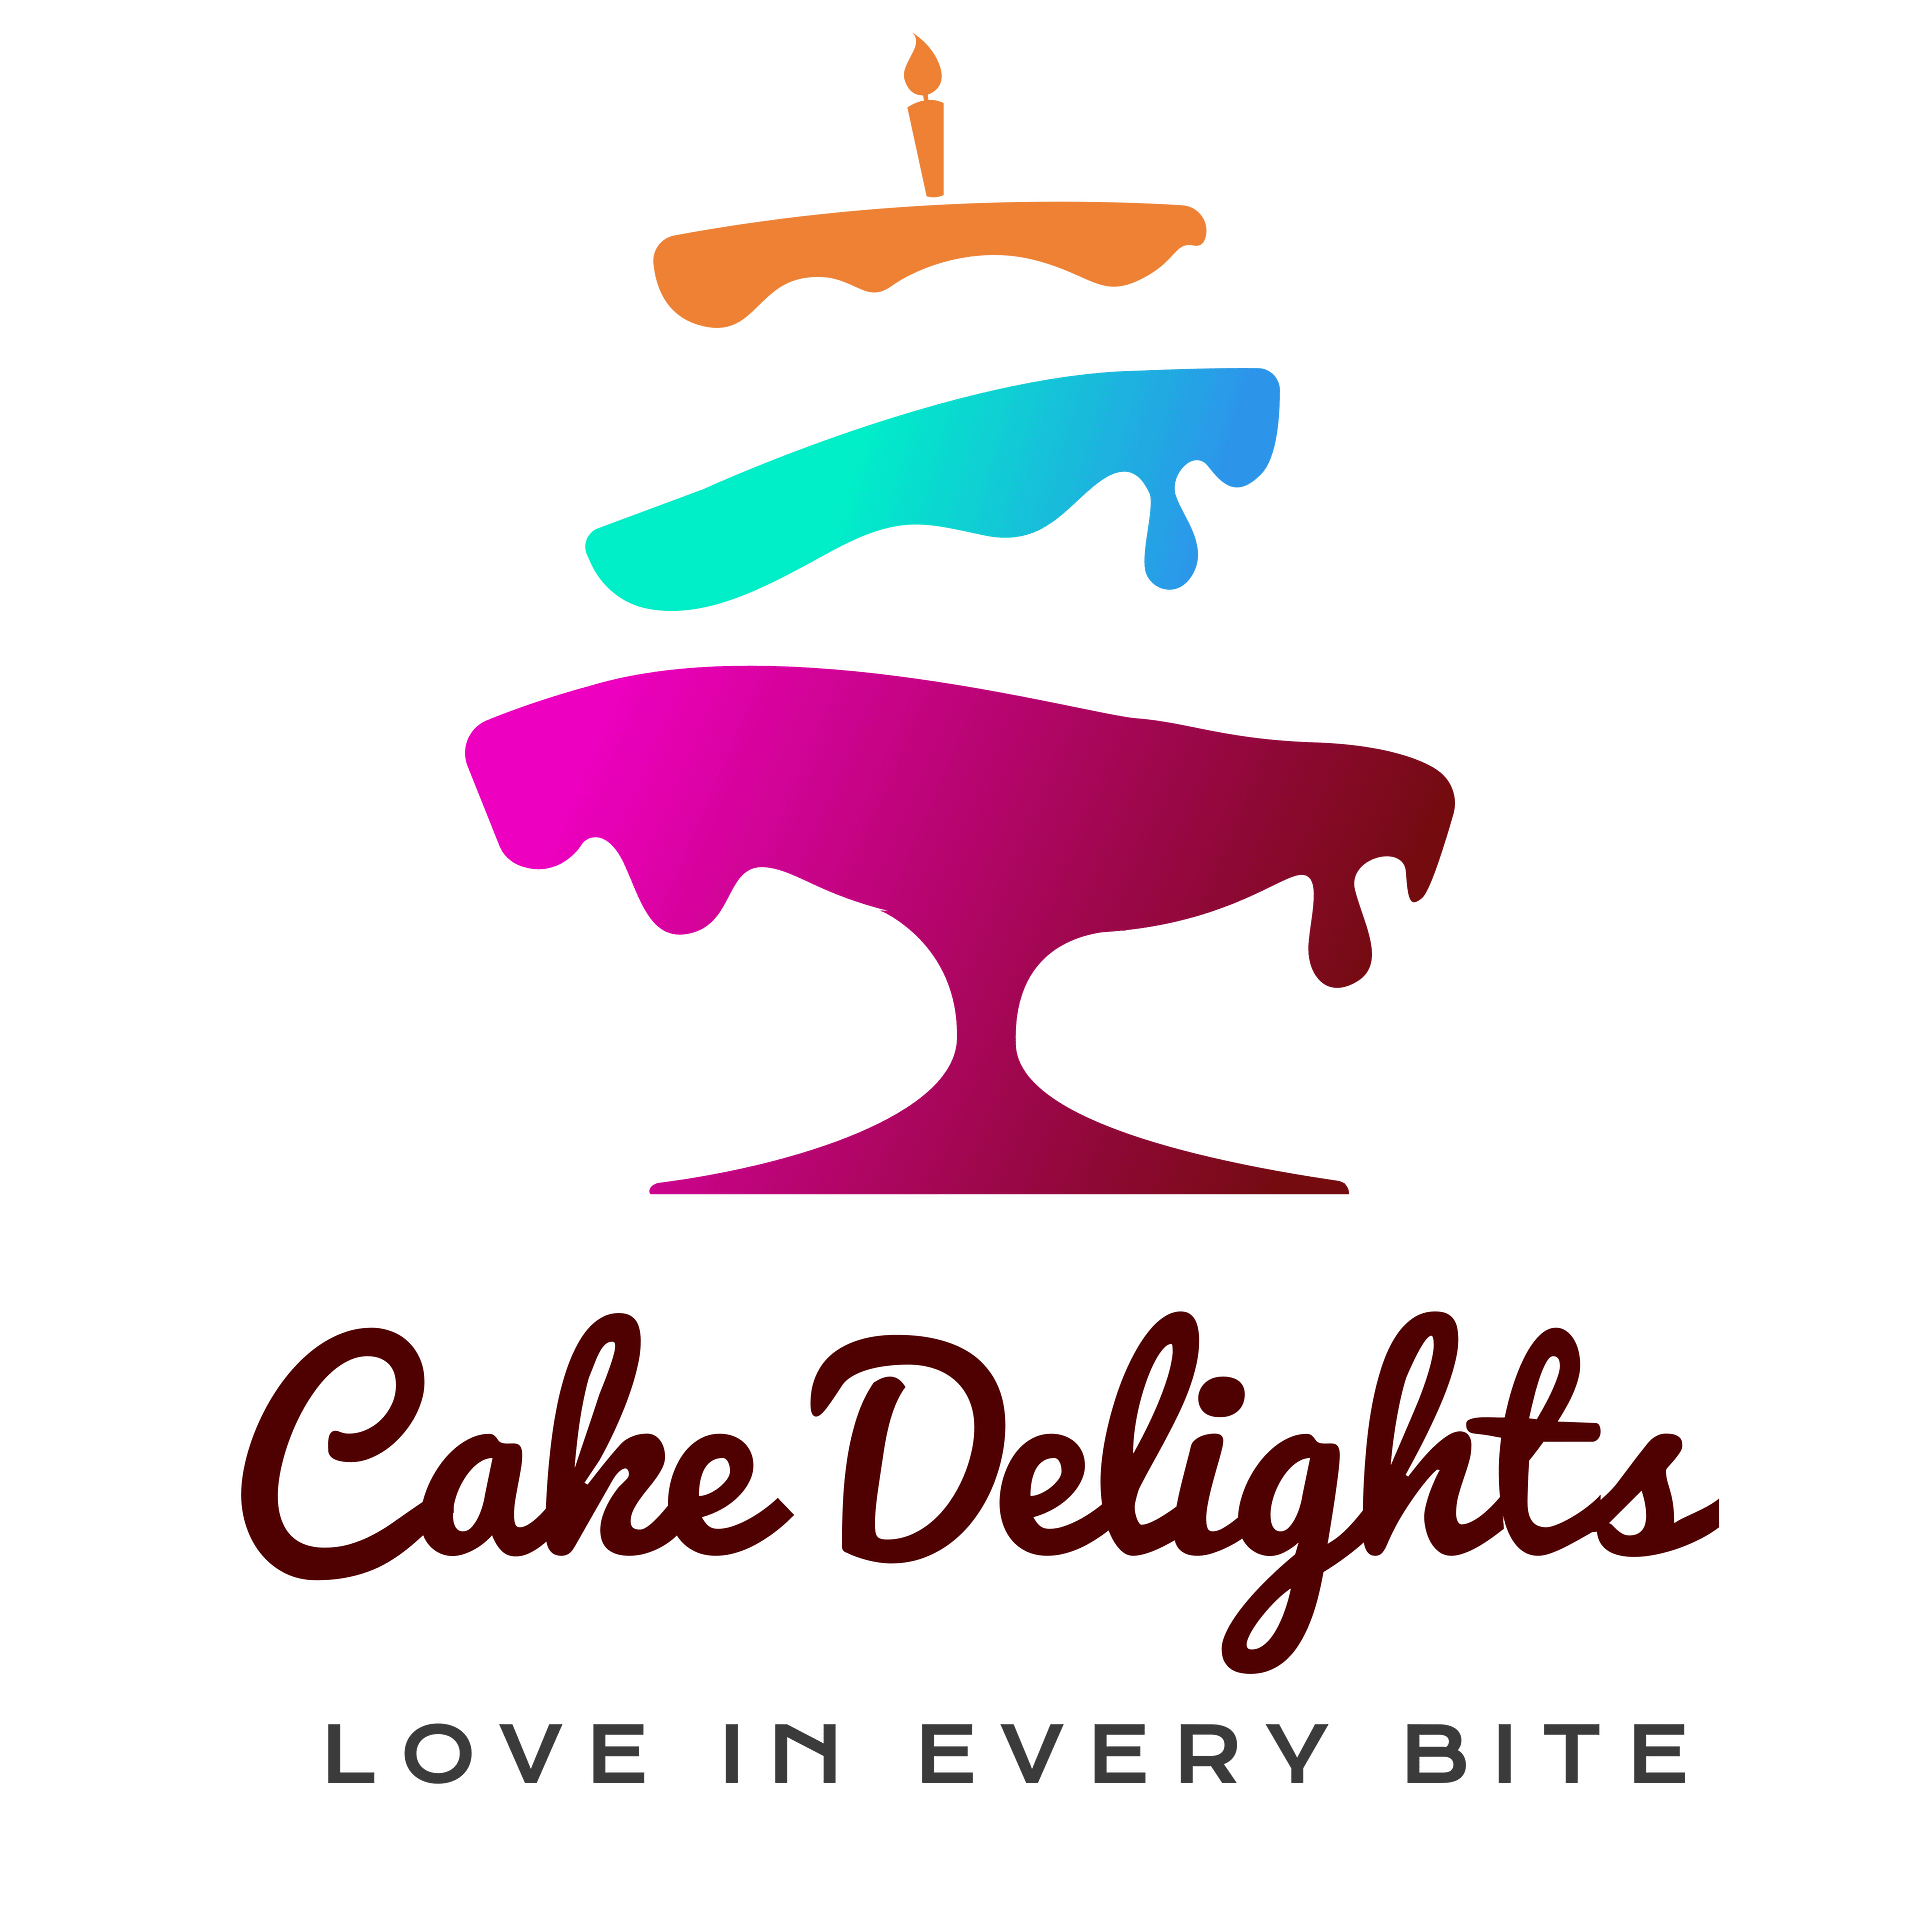 Home Cake Delights